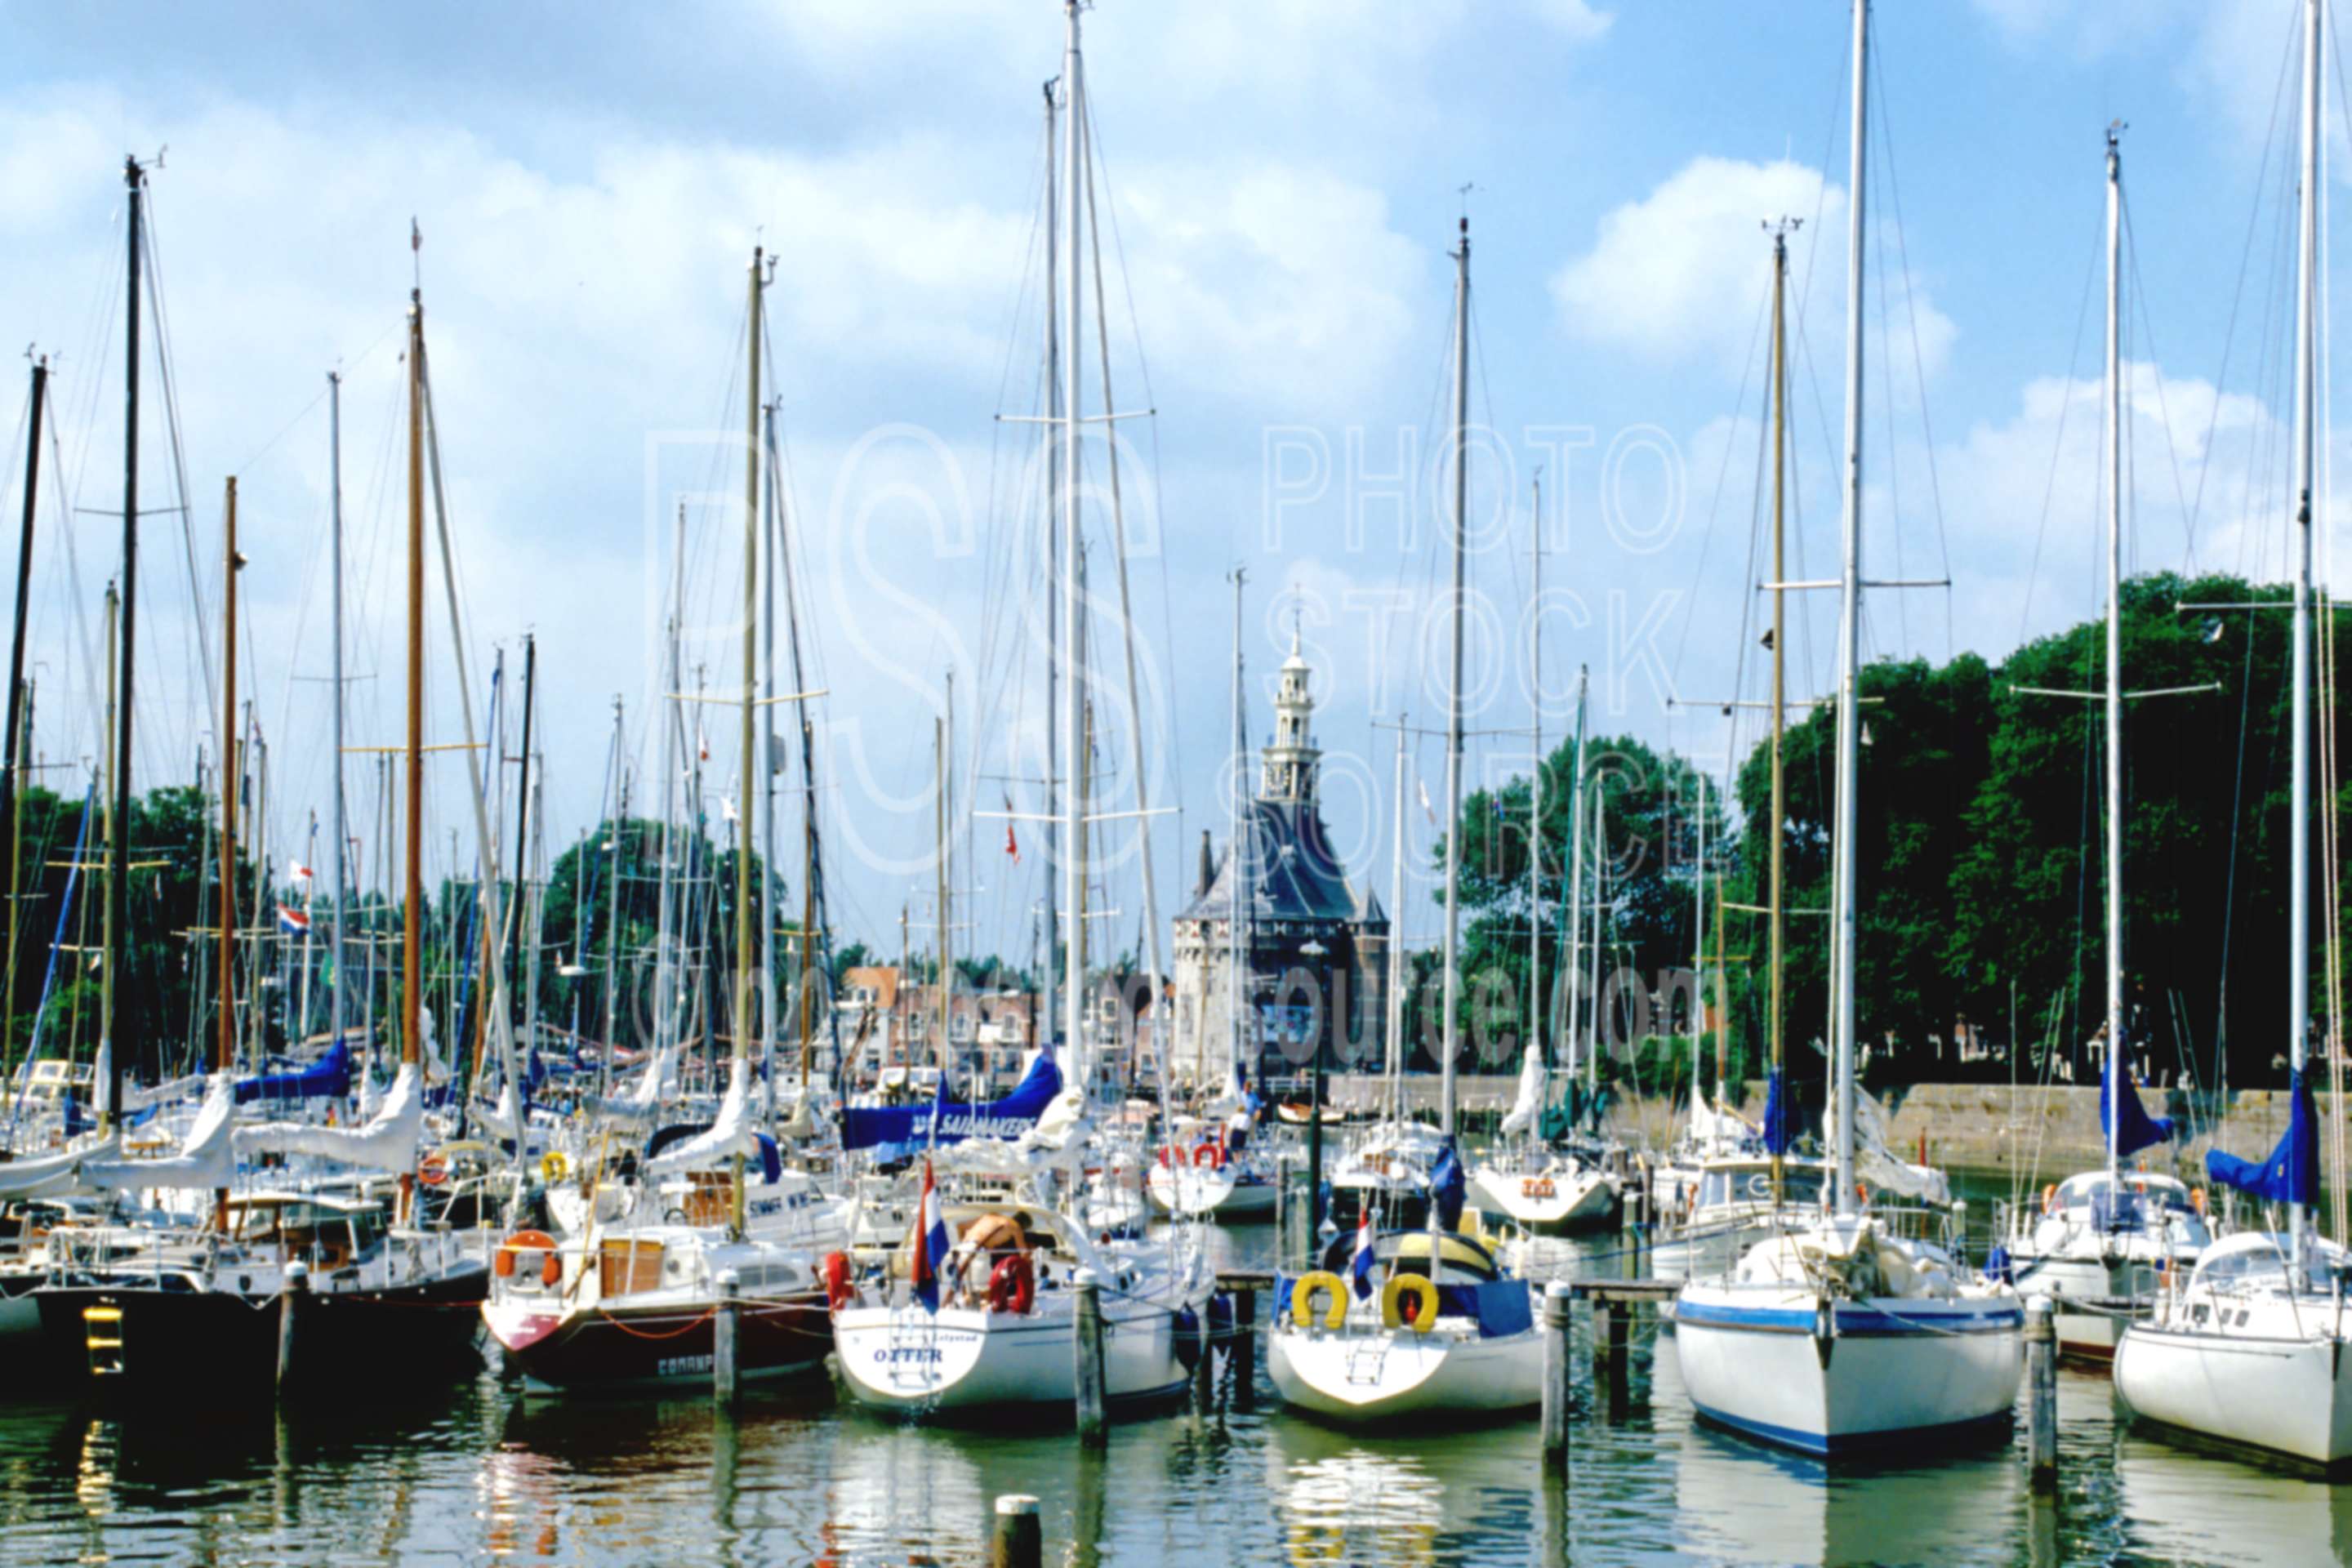 Boats in the Harbor,europe,harbor,holland,wharf,boats